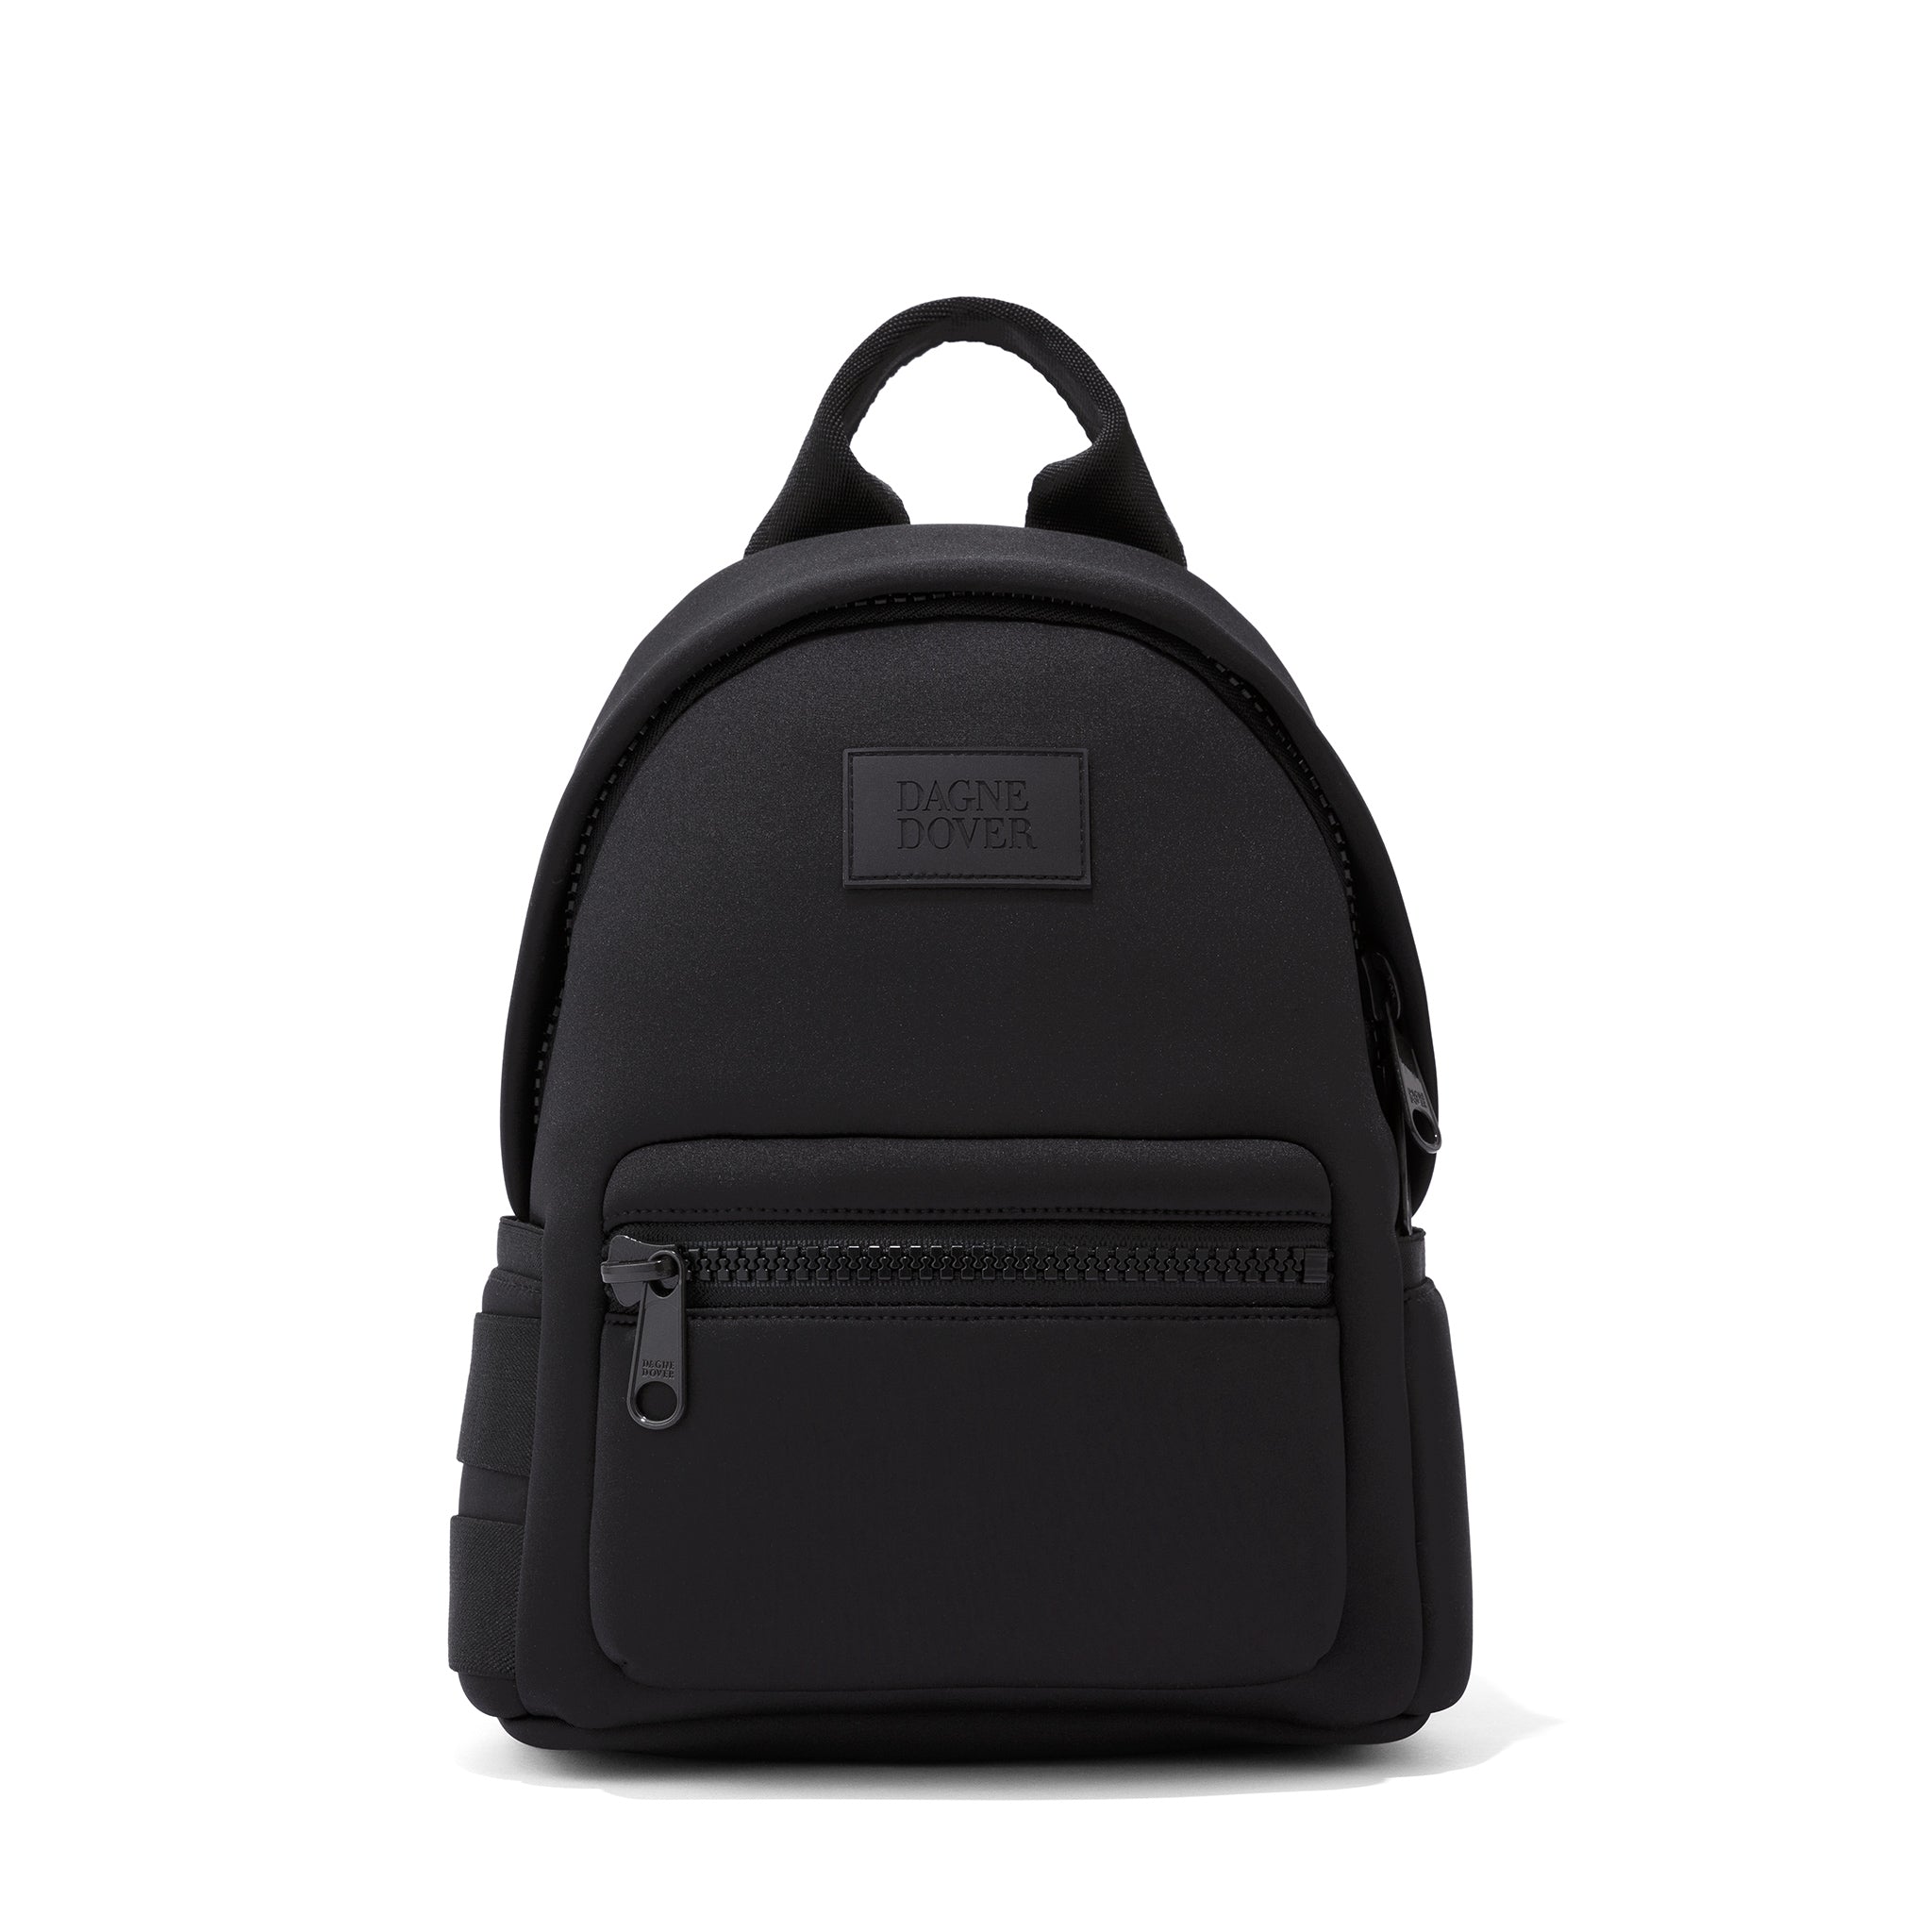 Best Women's Backpacks For Work 2021 » Sparly Shop